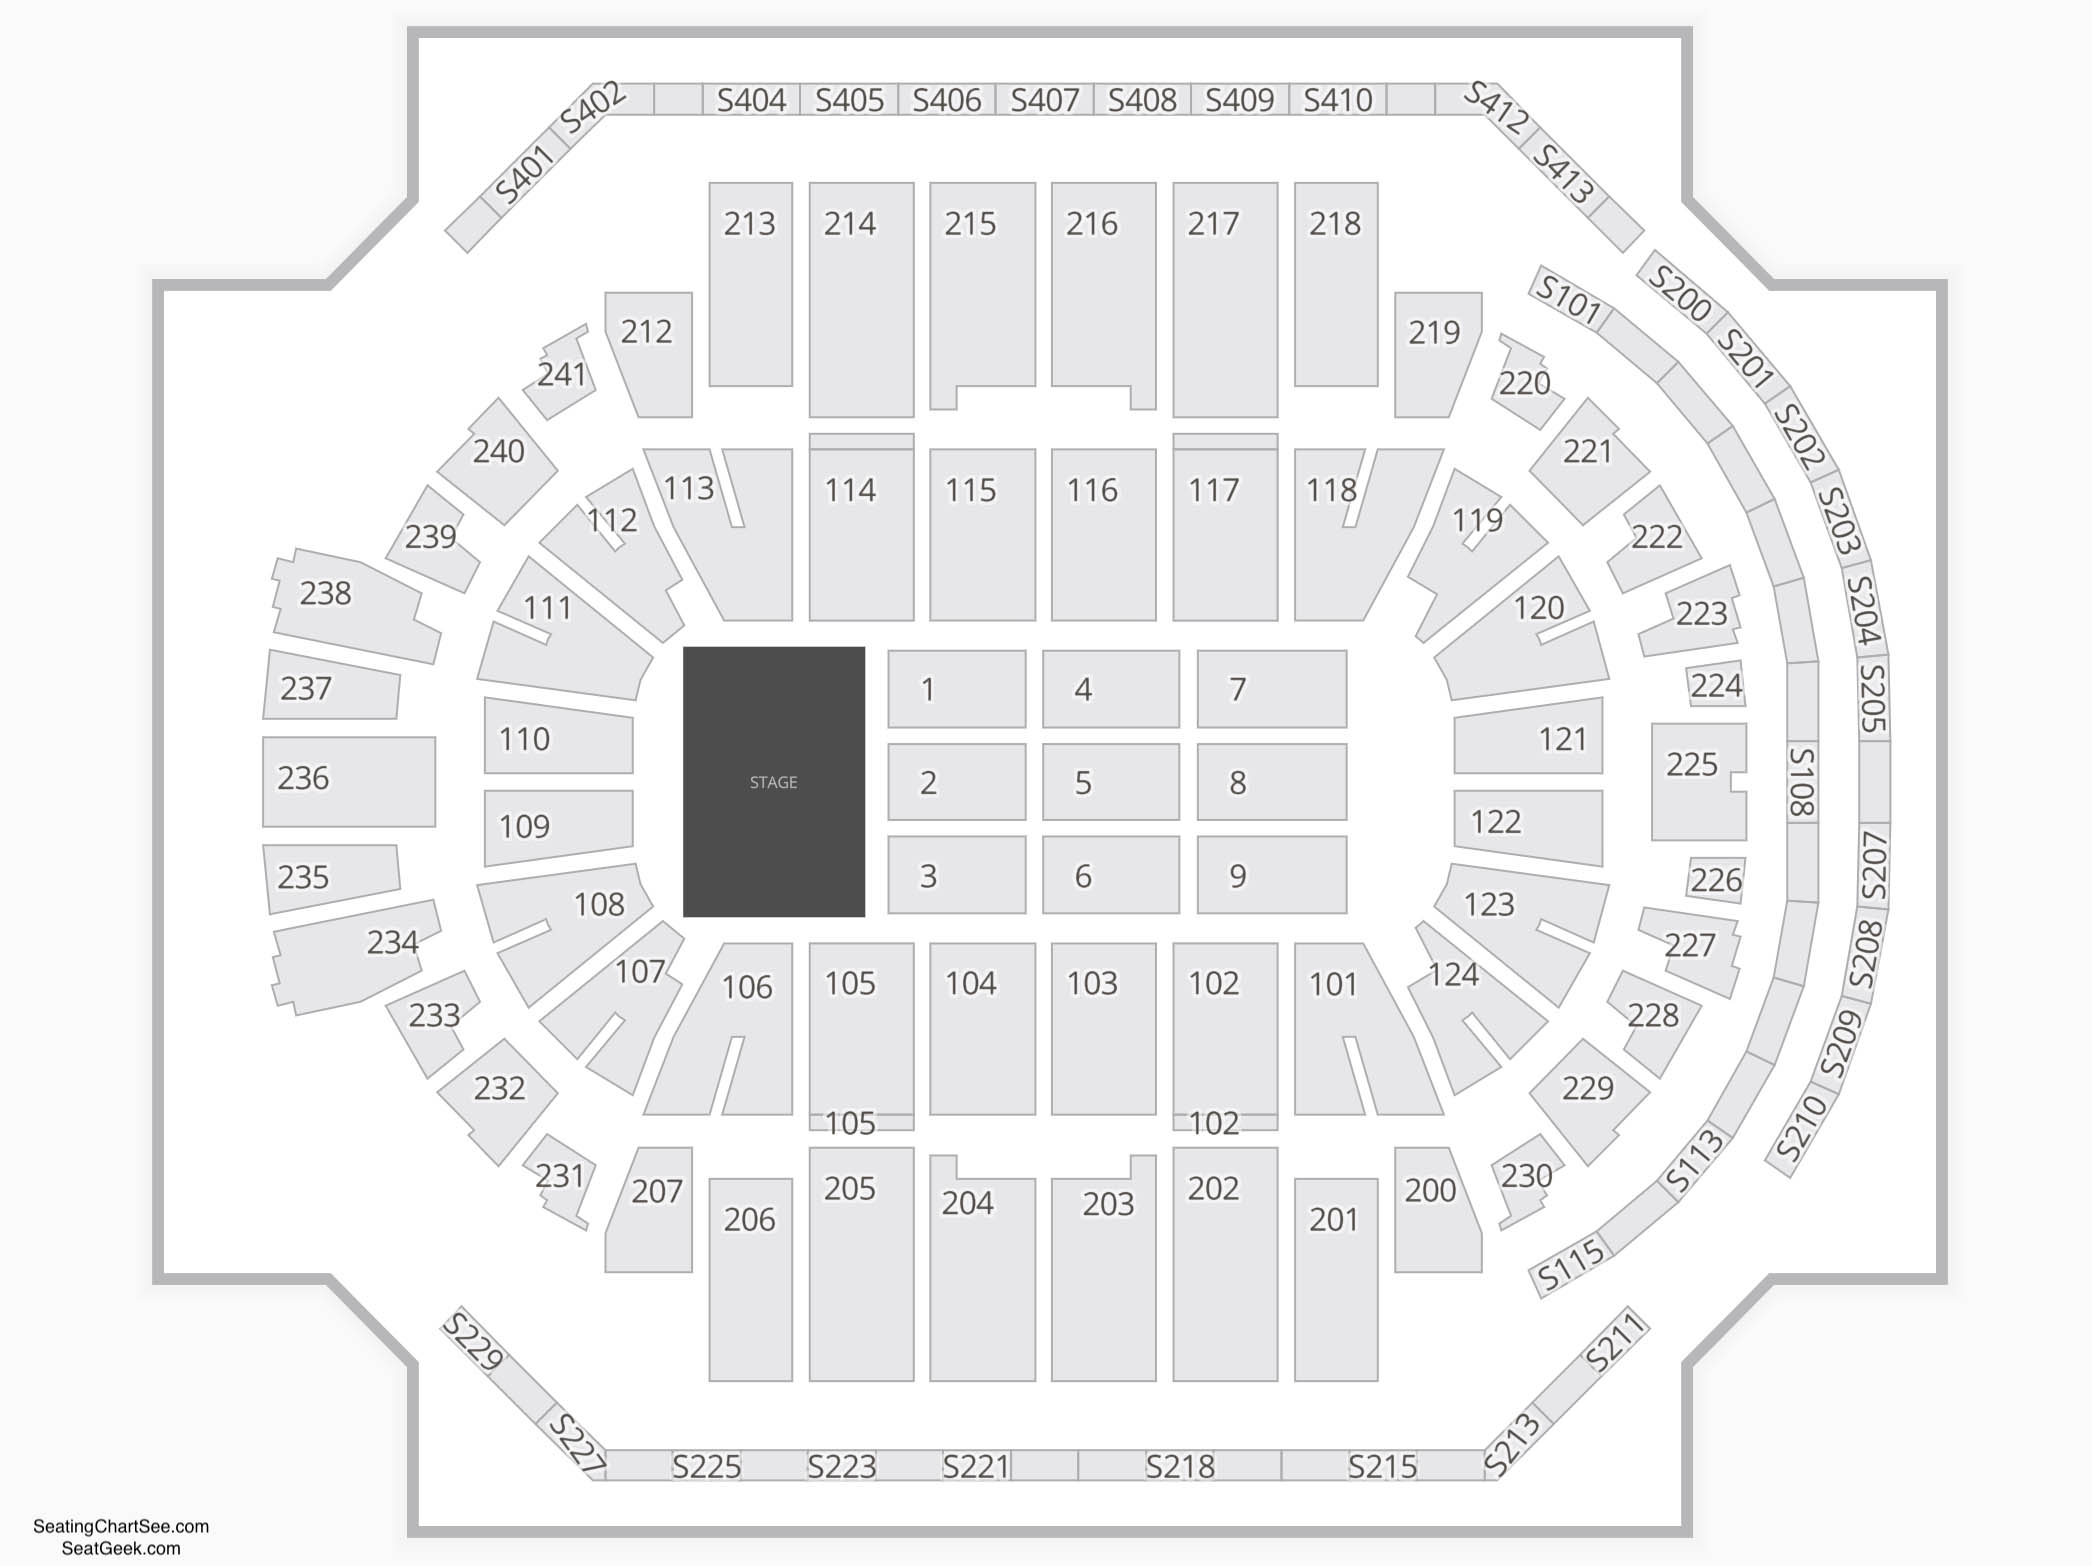 Xfinity Center Hartford Seating Chart With Seat Numbers Elcho Table